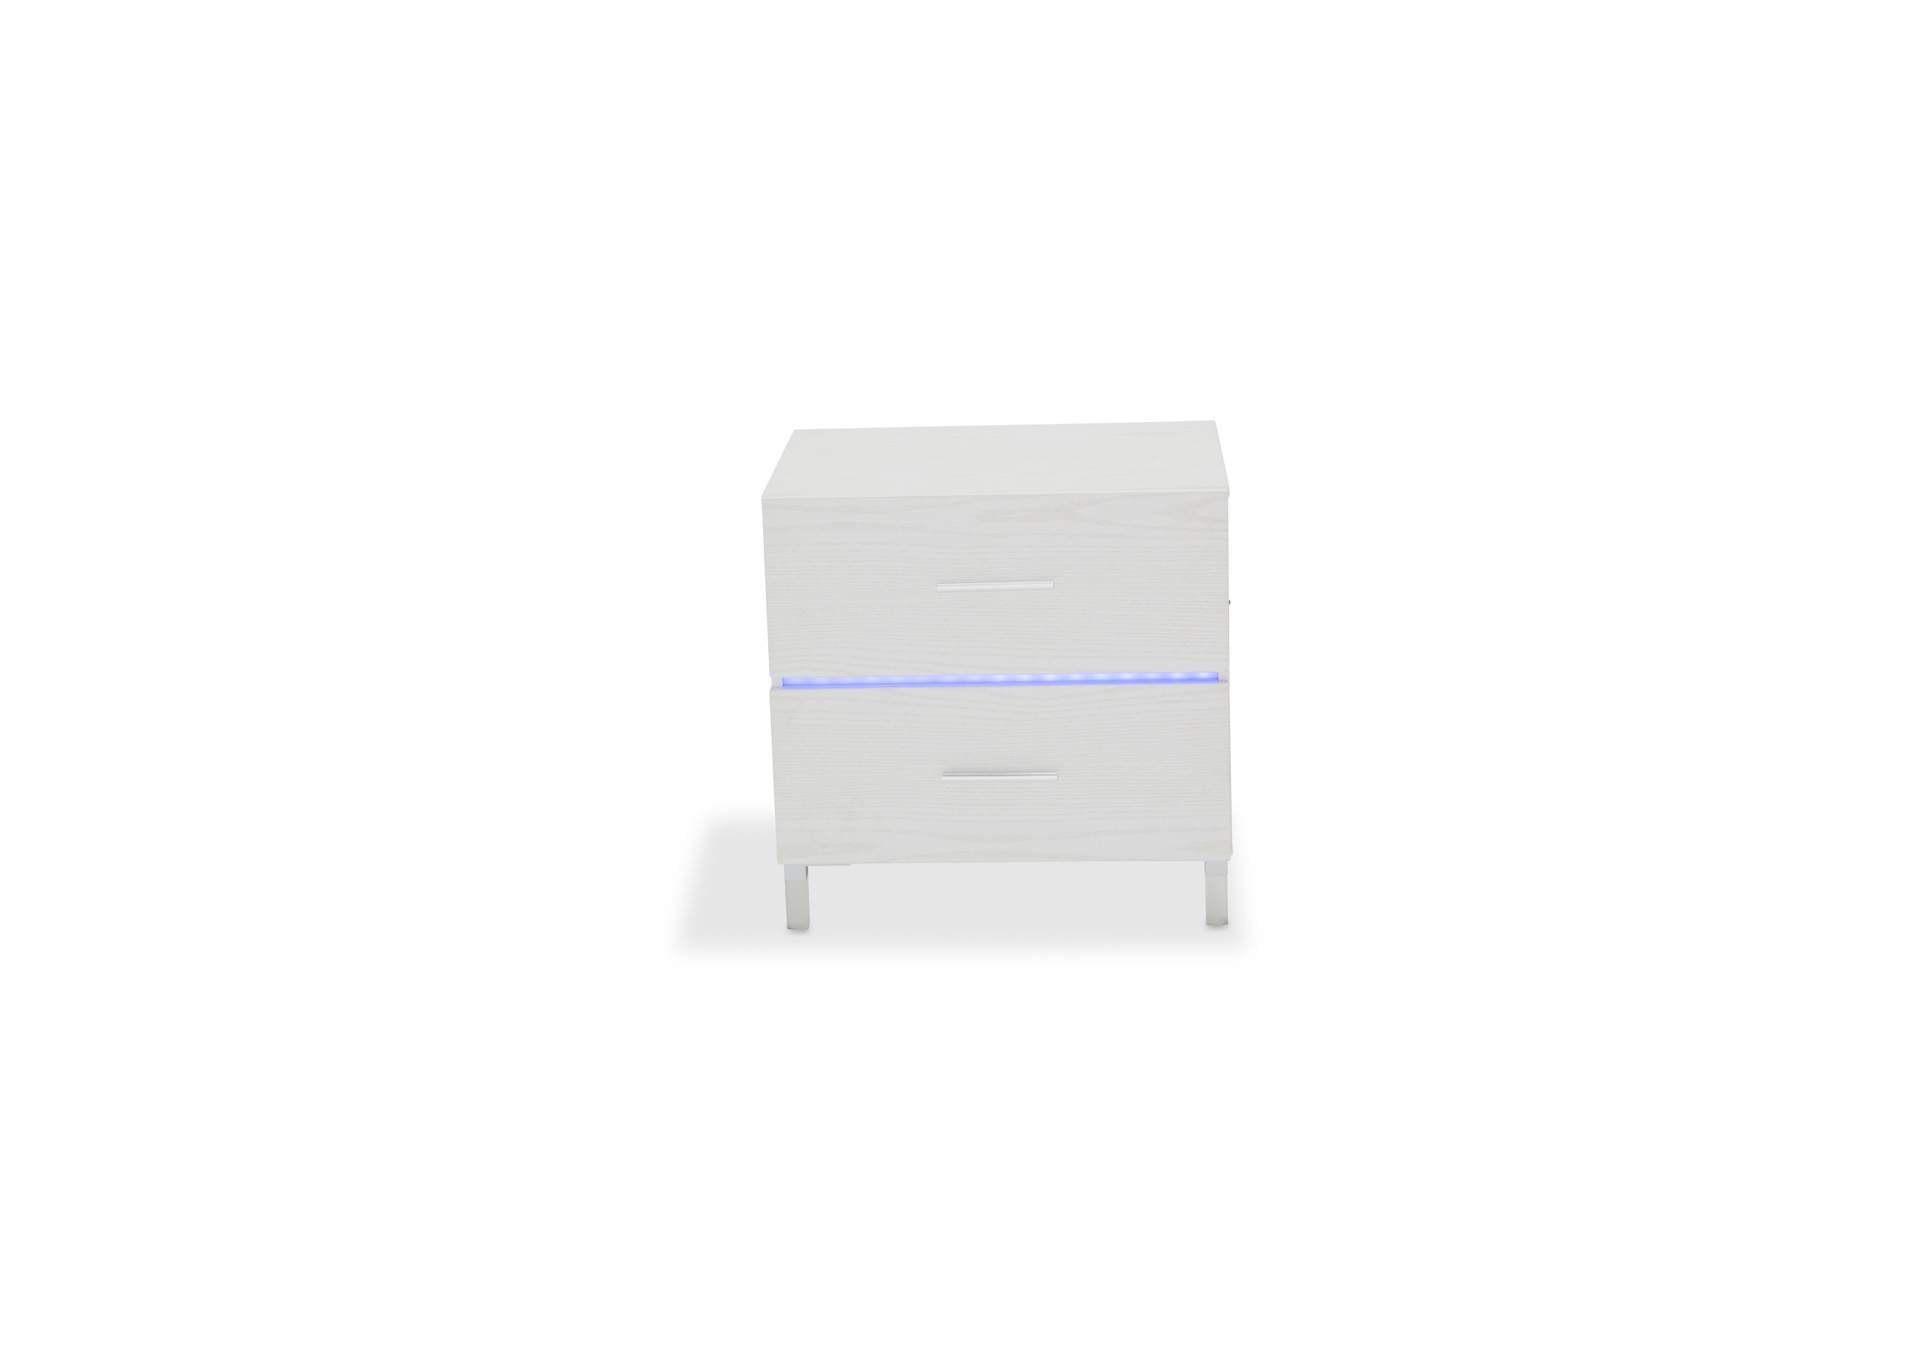 Lumiere Nighstand w/LED Lighting Frost,AICO